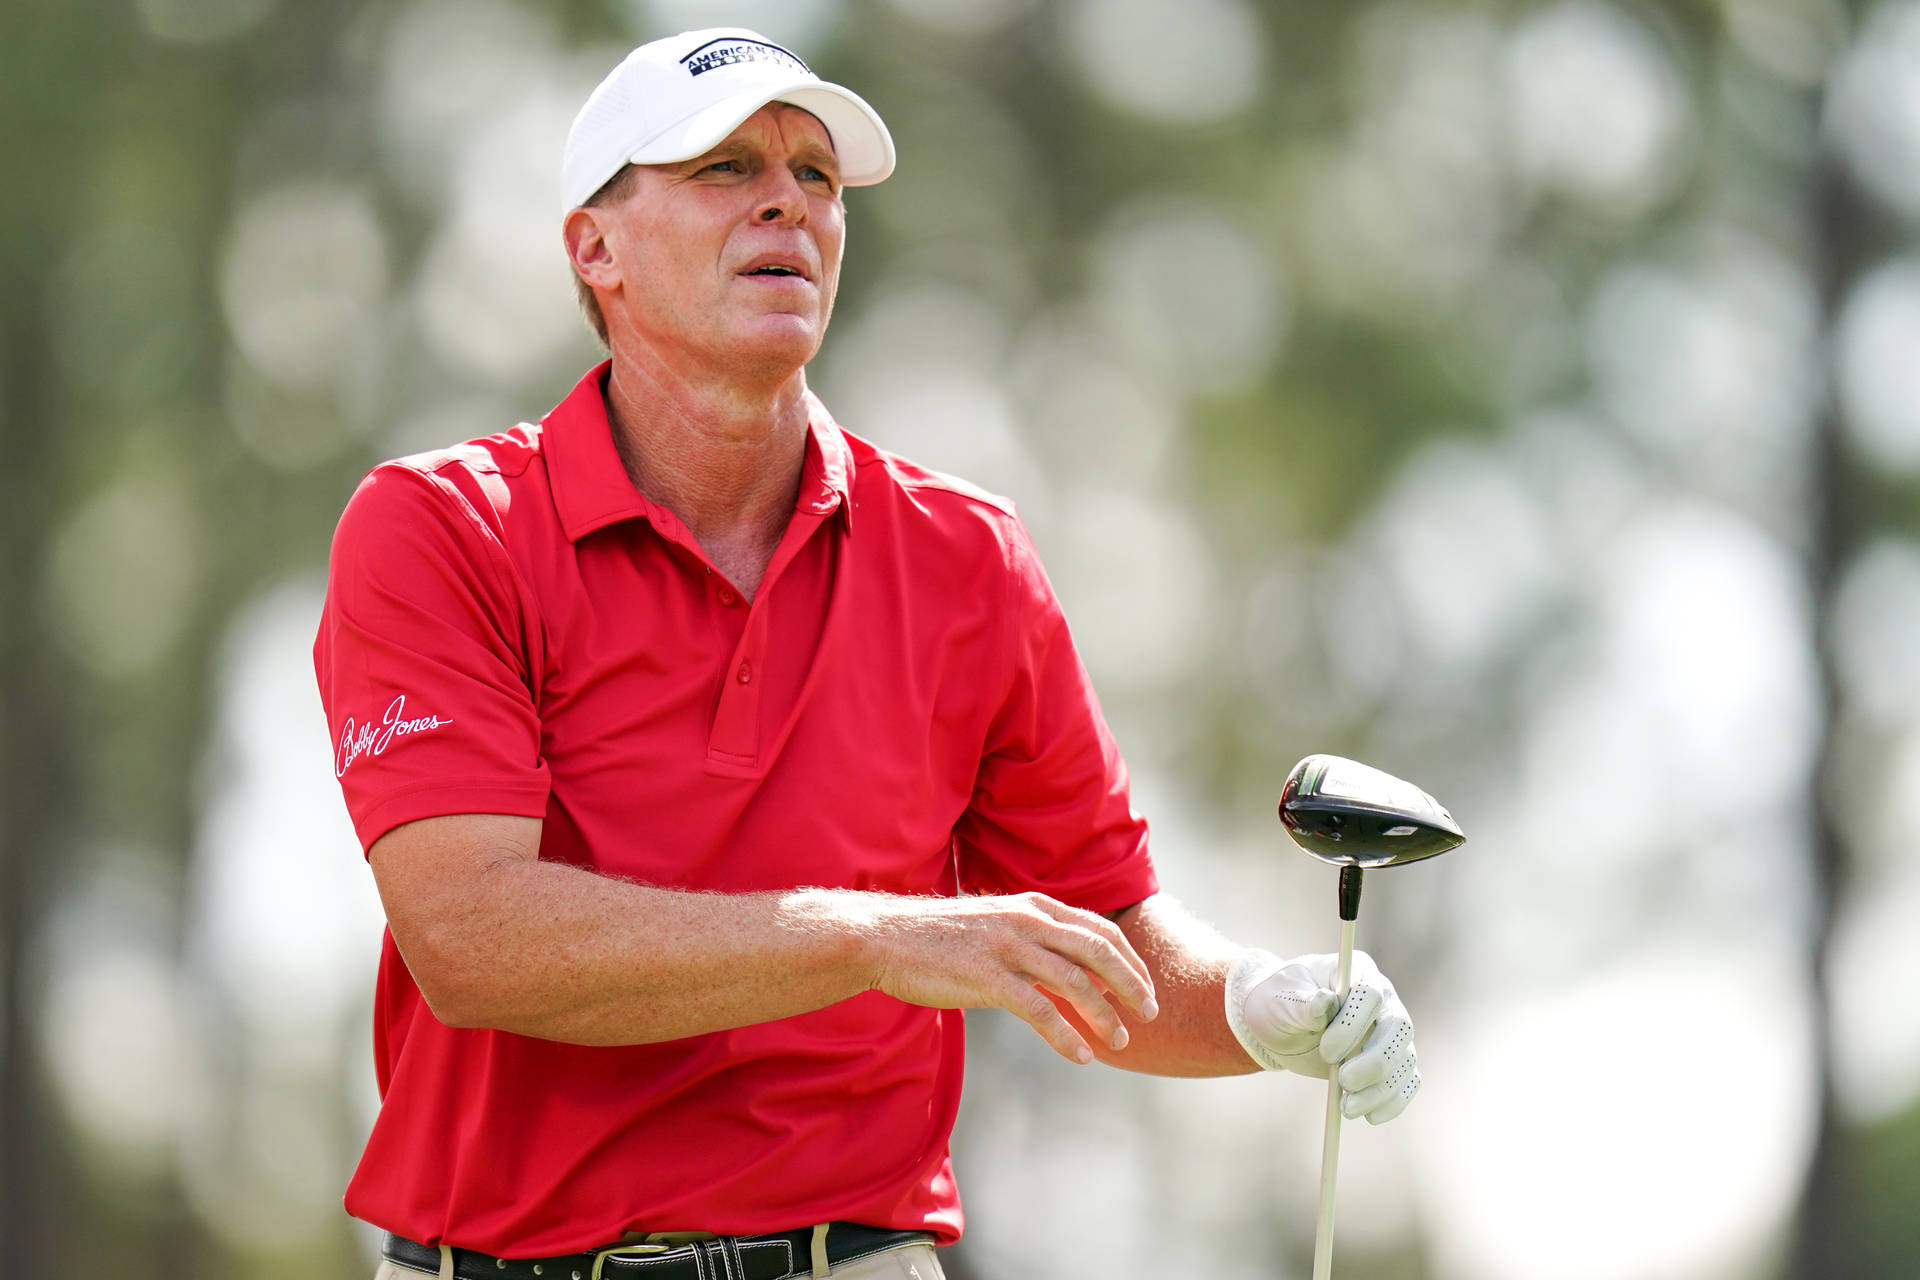 "Steve Stricker meticulously studying the golf ball on the course" Wallpaper